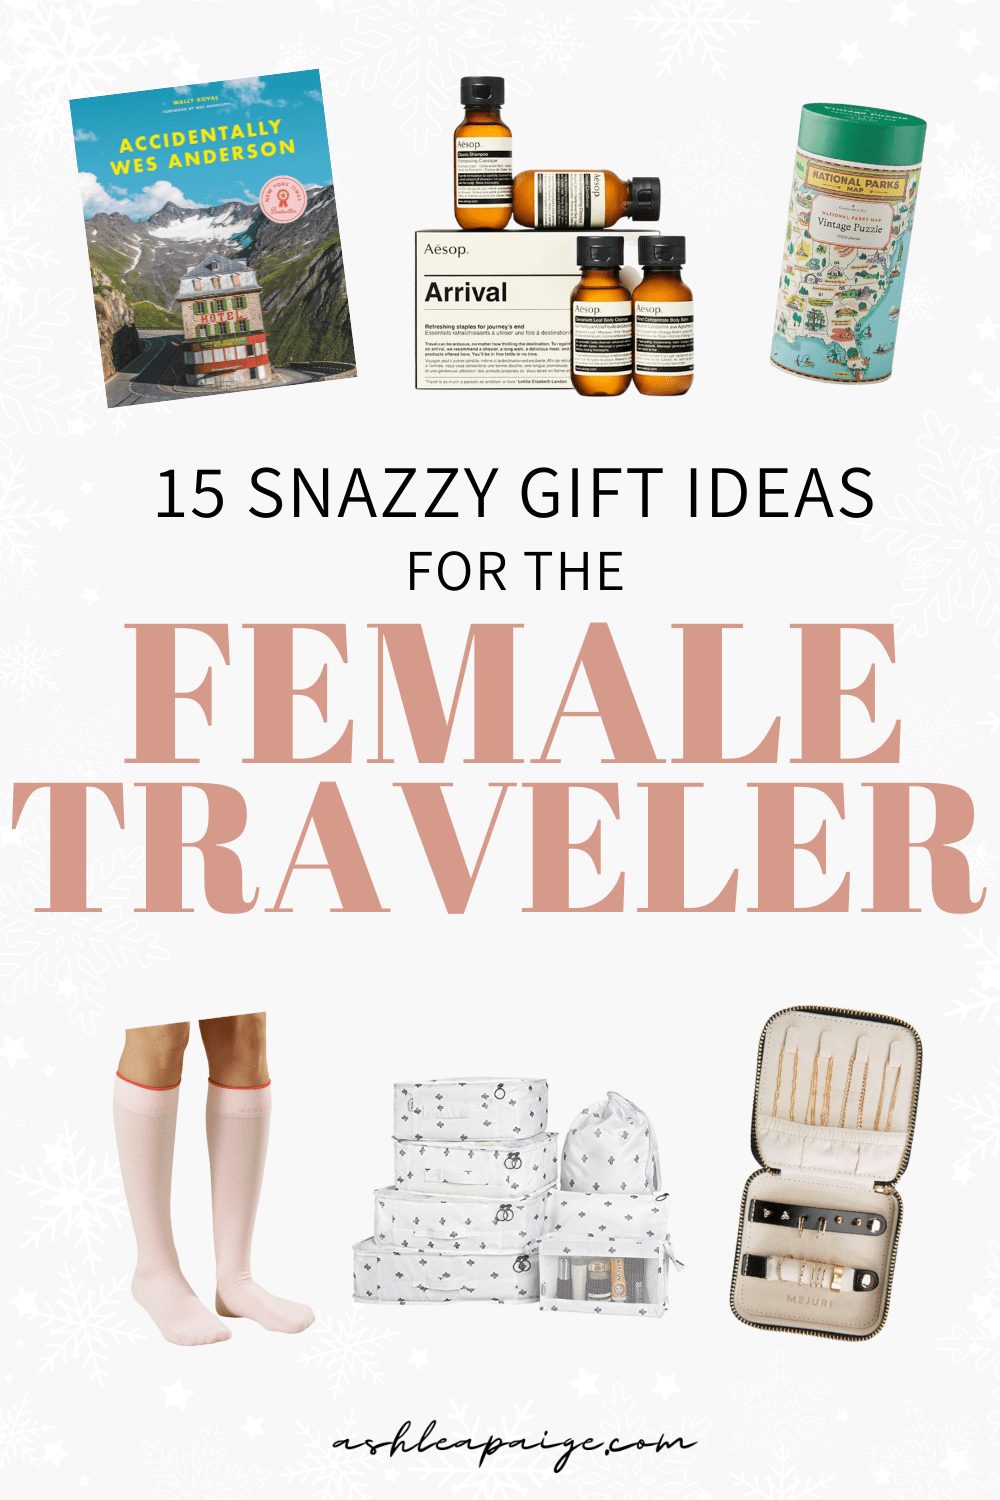 10+ Fun Gift Ideas For A Woman Who Has Everything - Simmer to Slimmer